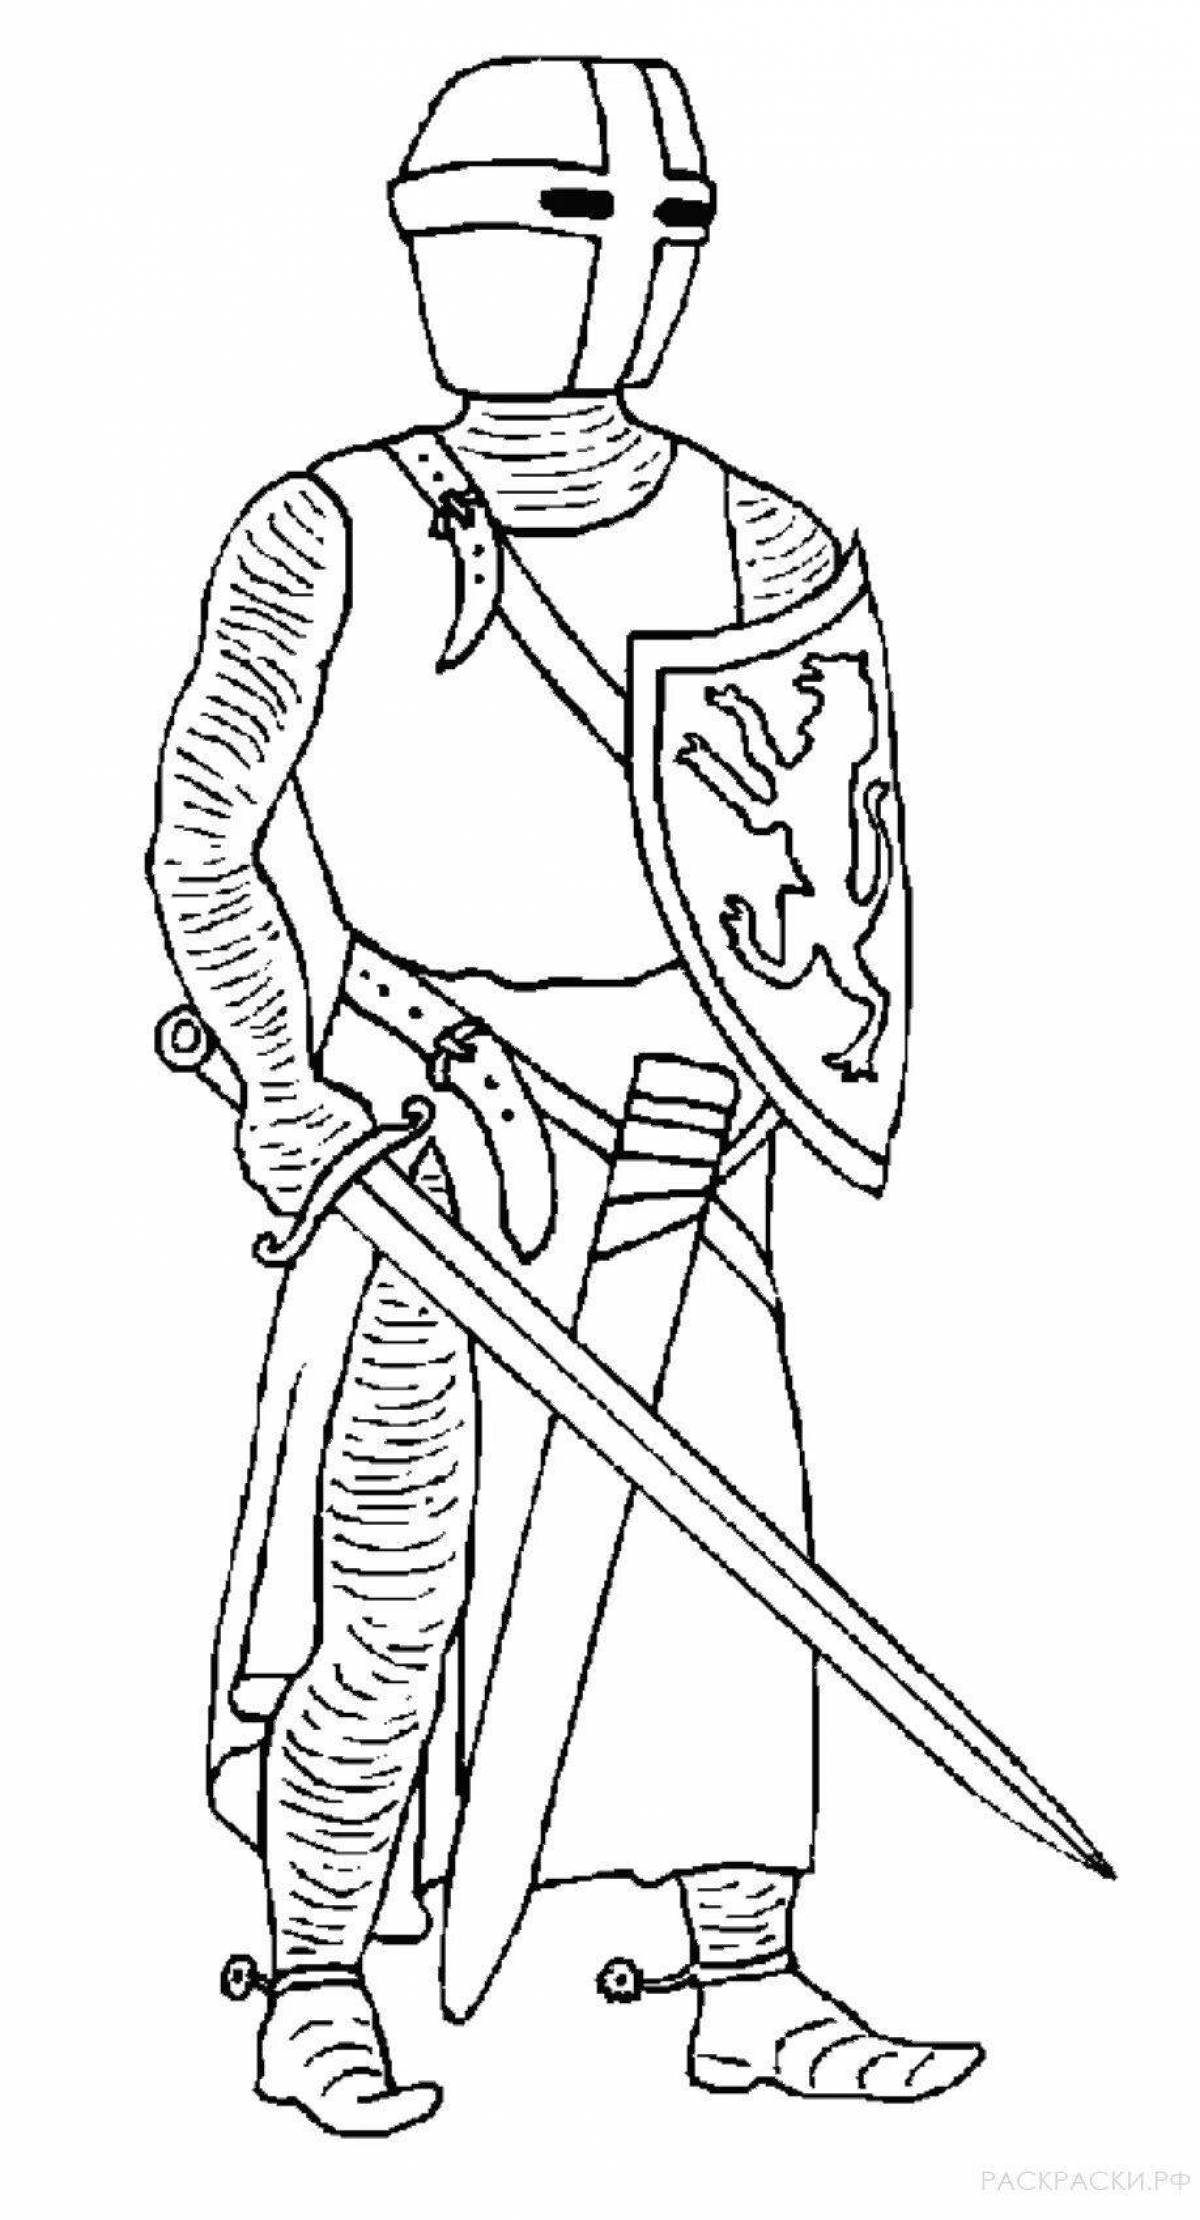 Shiny knight in armor coloring book